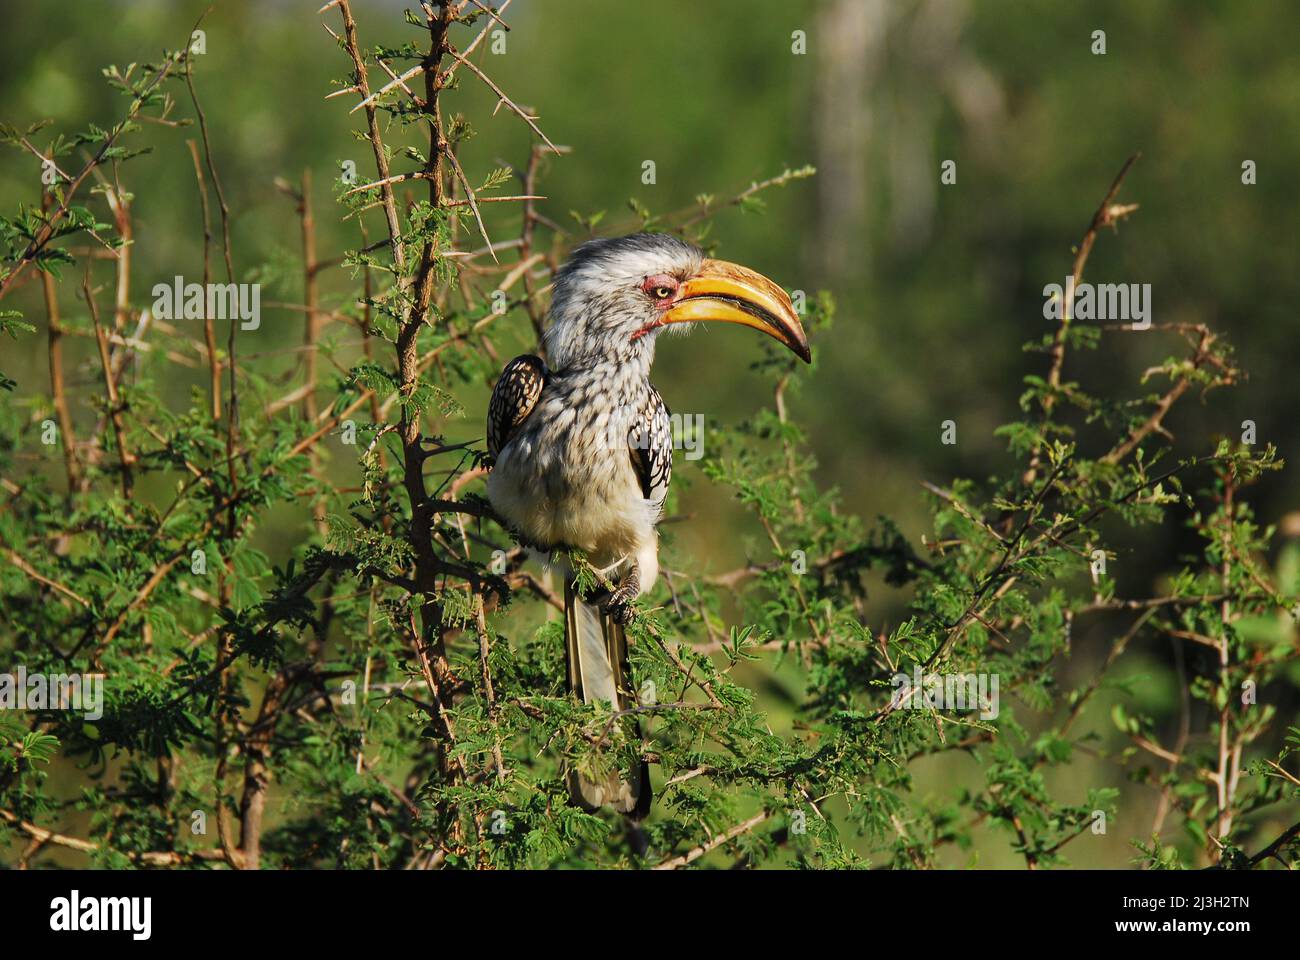 Close up of a wild Yellow-billed Hornbill (Tockus leucomelas) perched on a thorny Acacia limb in South Africa. Shot while on safari. Stock Photo